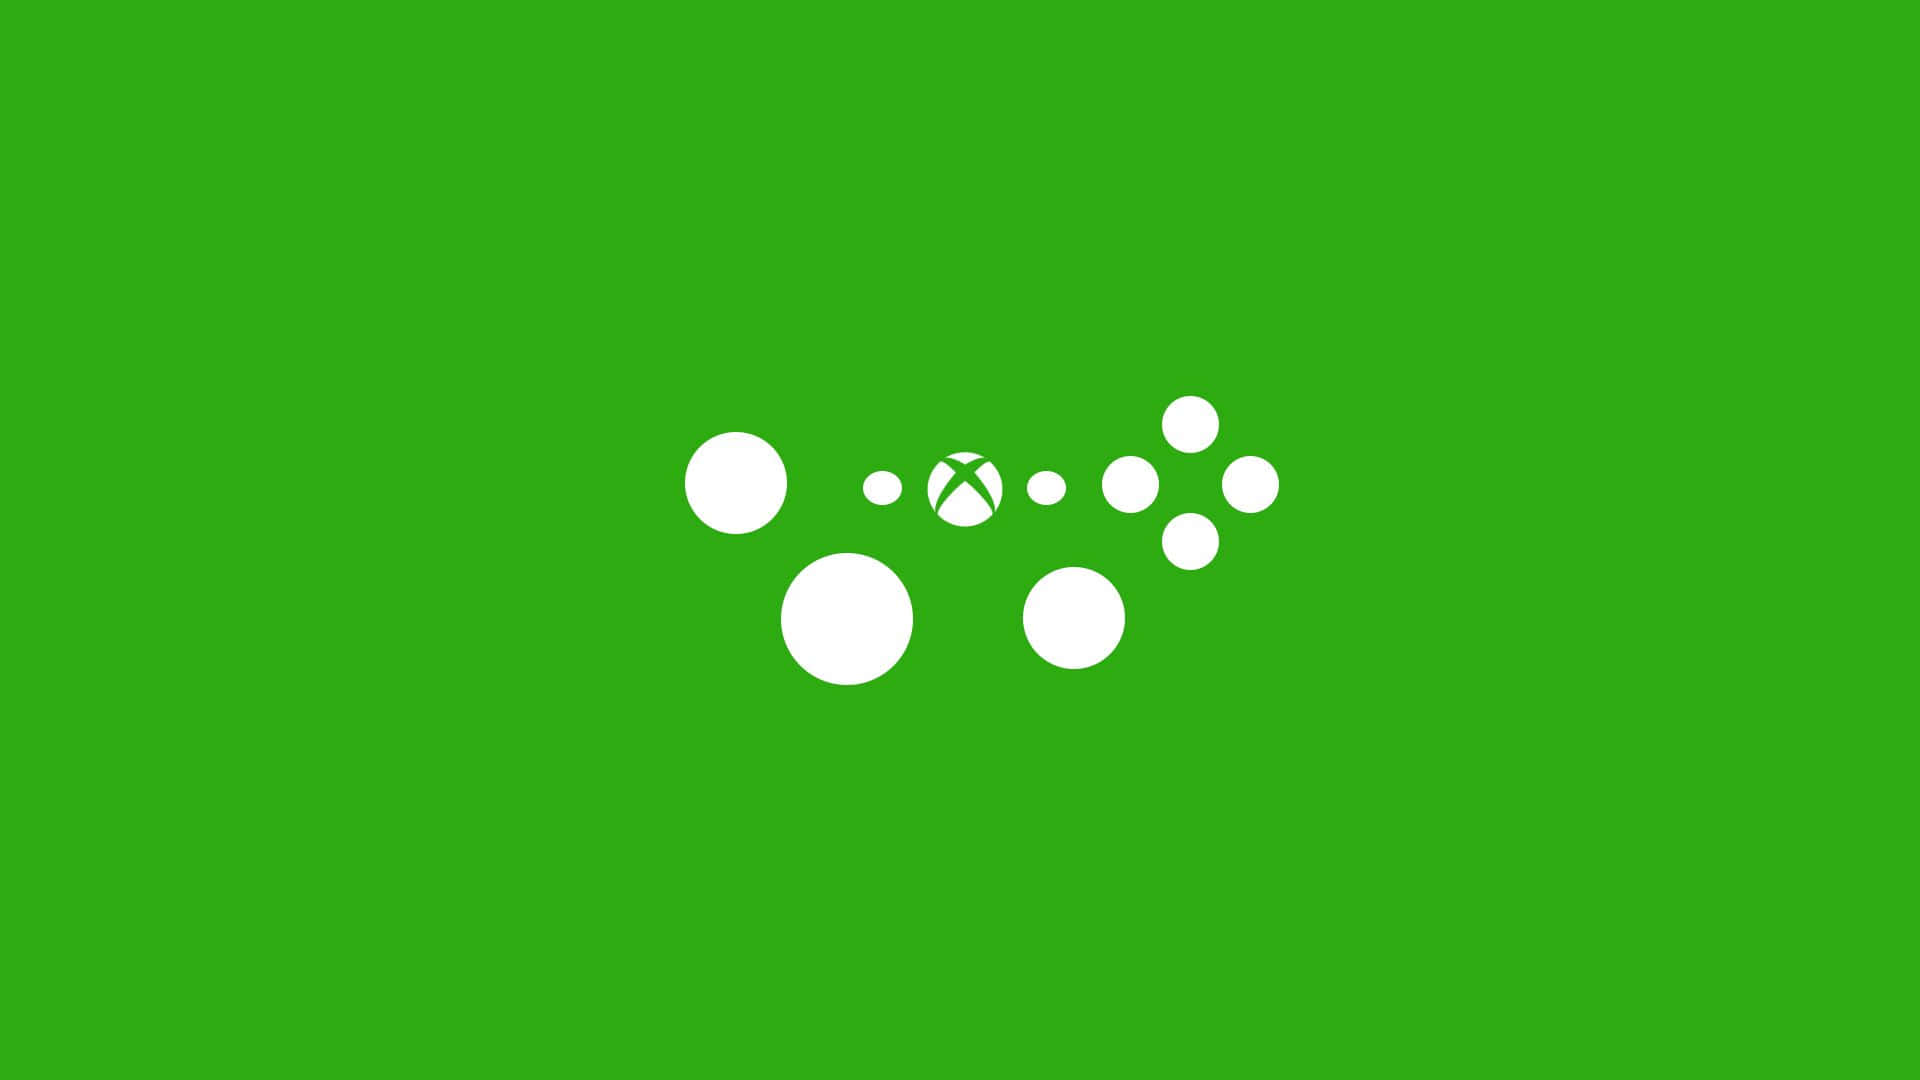 Get Your Gaming On With Cool Xbox Wallpaper